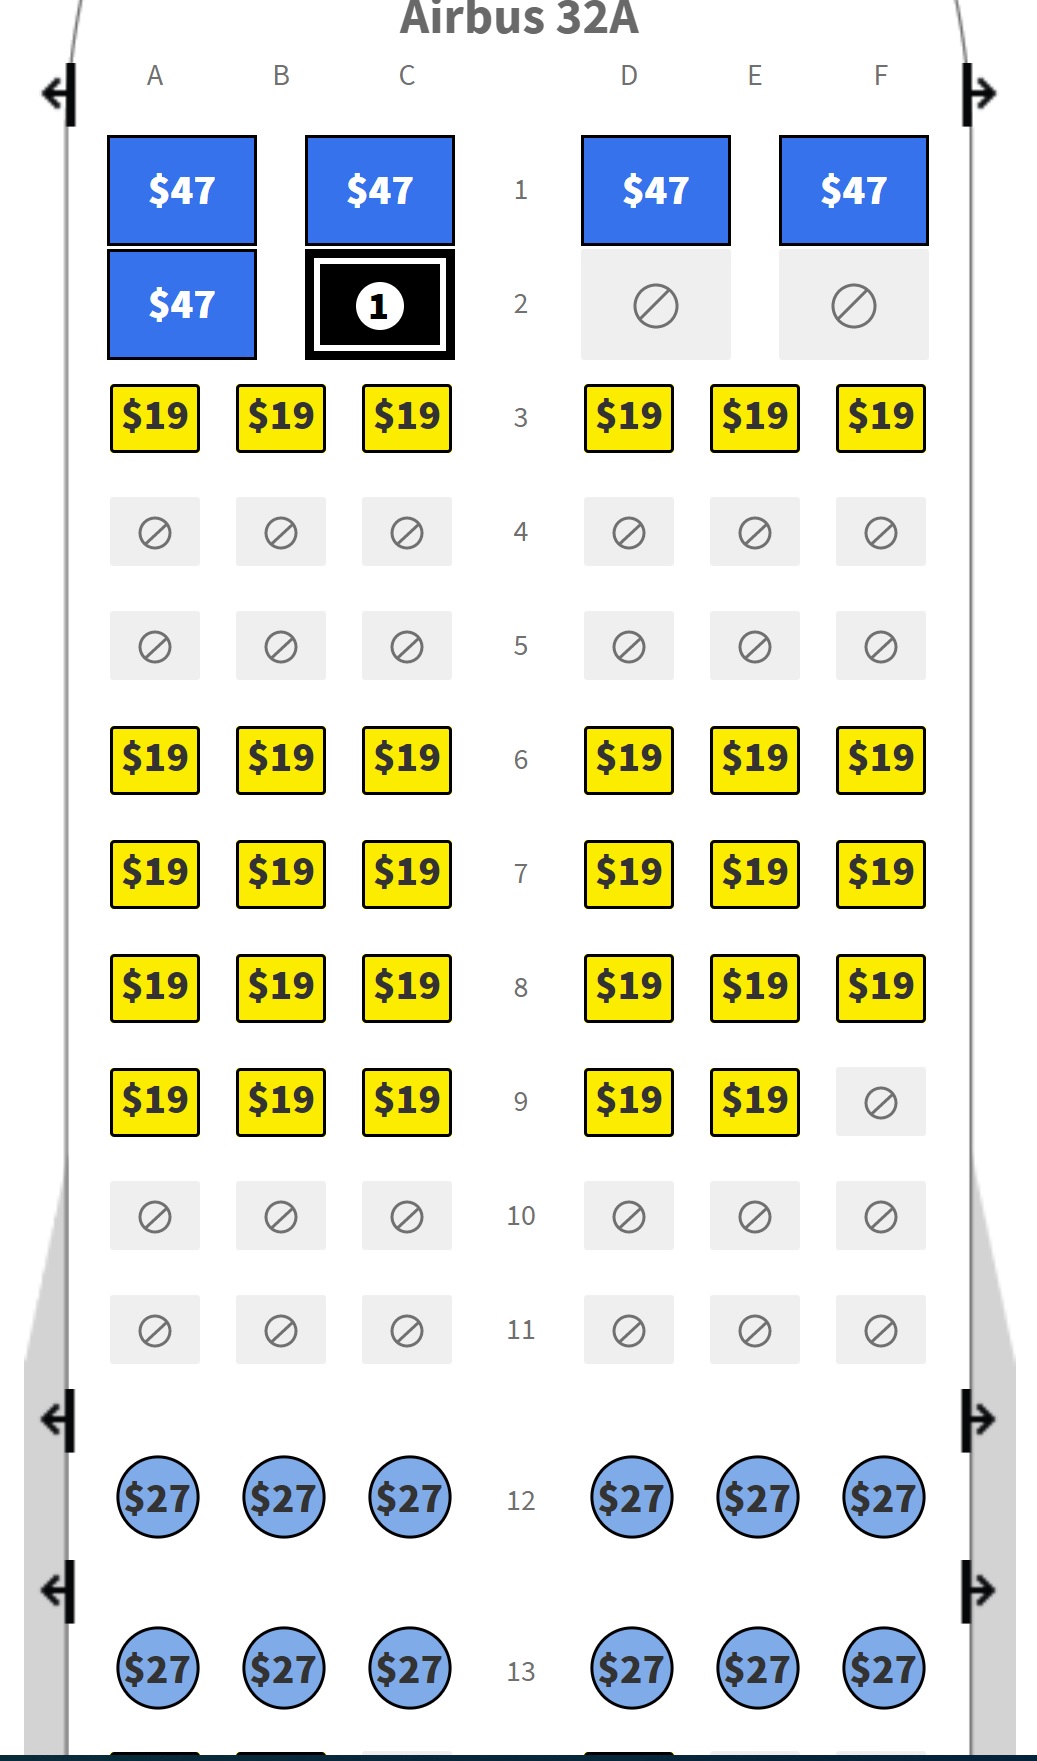 spirit airlines seating assignments